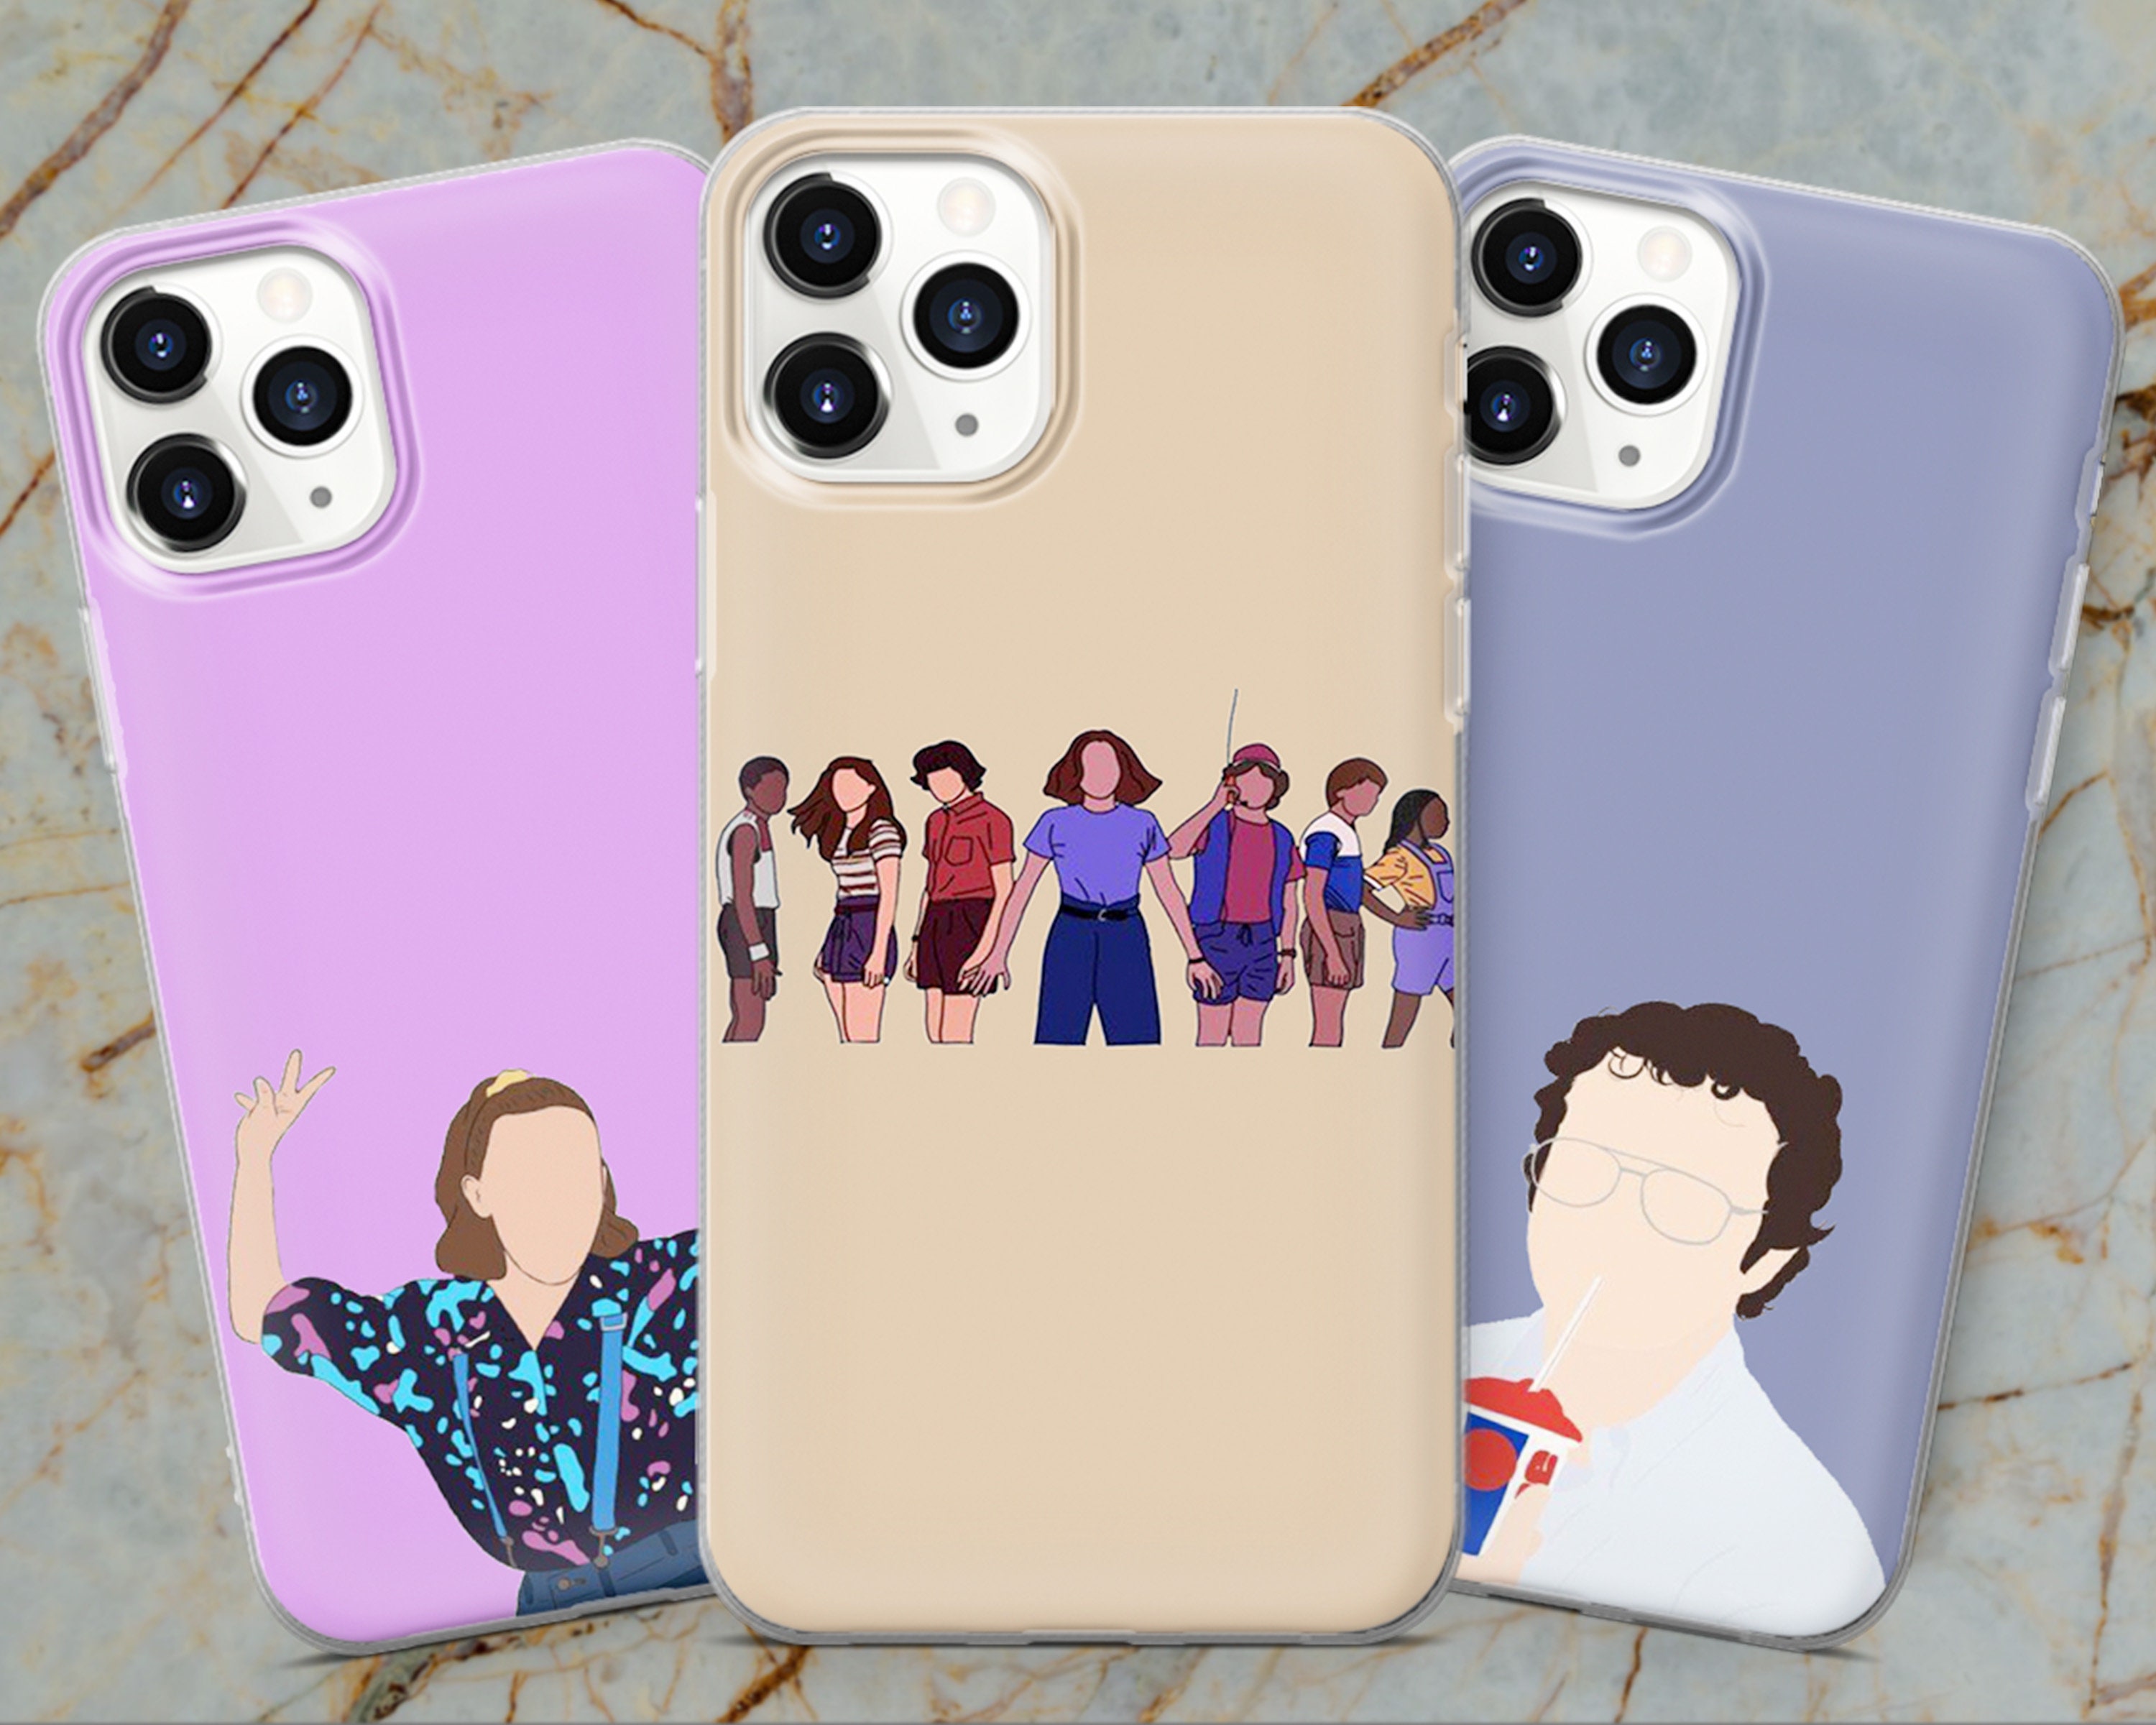 Where to Buy Unique Phone Cases in 2022 to Match Your Aesthetic